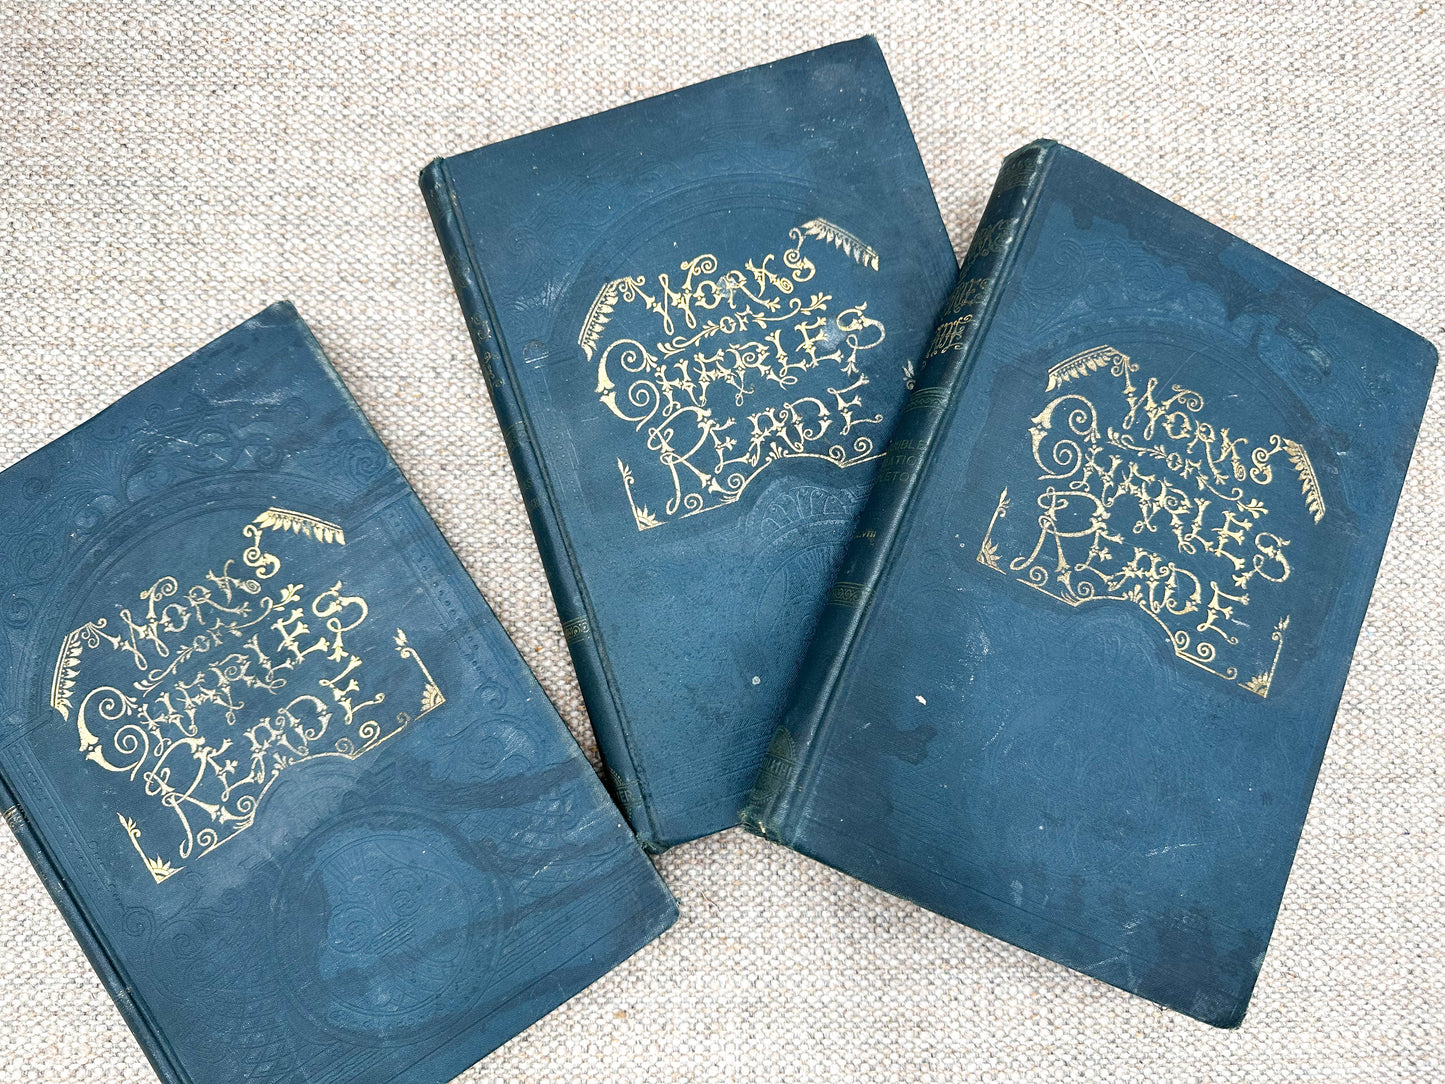 Charles Reade Book (Three Available)